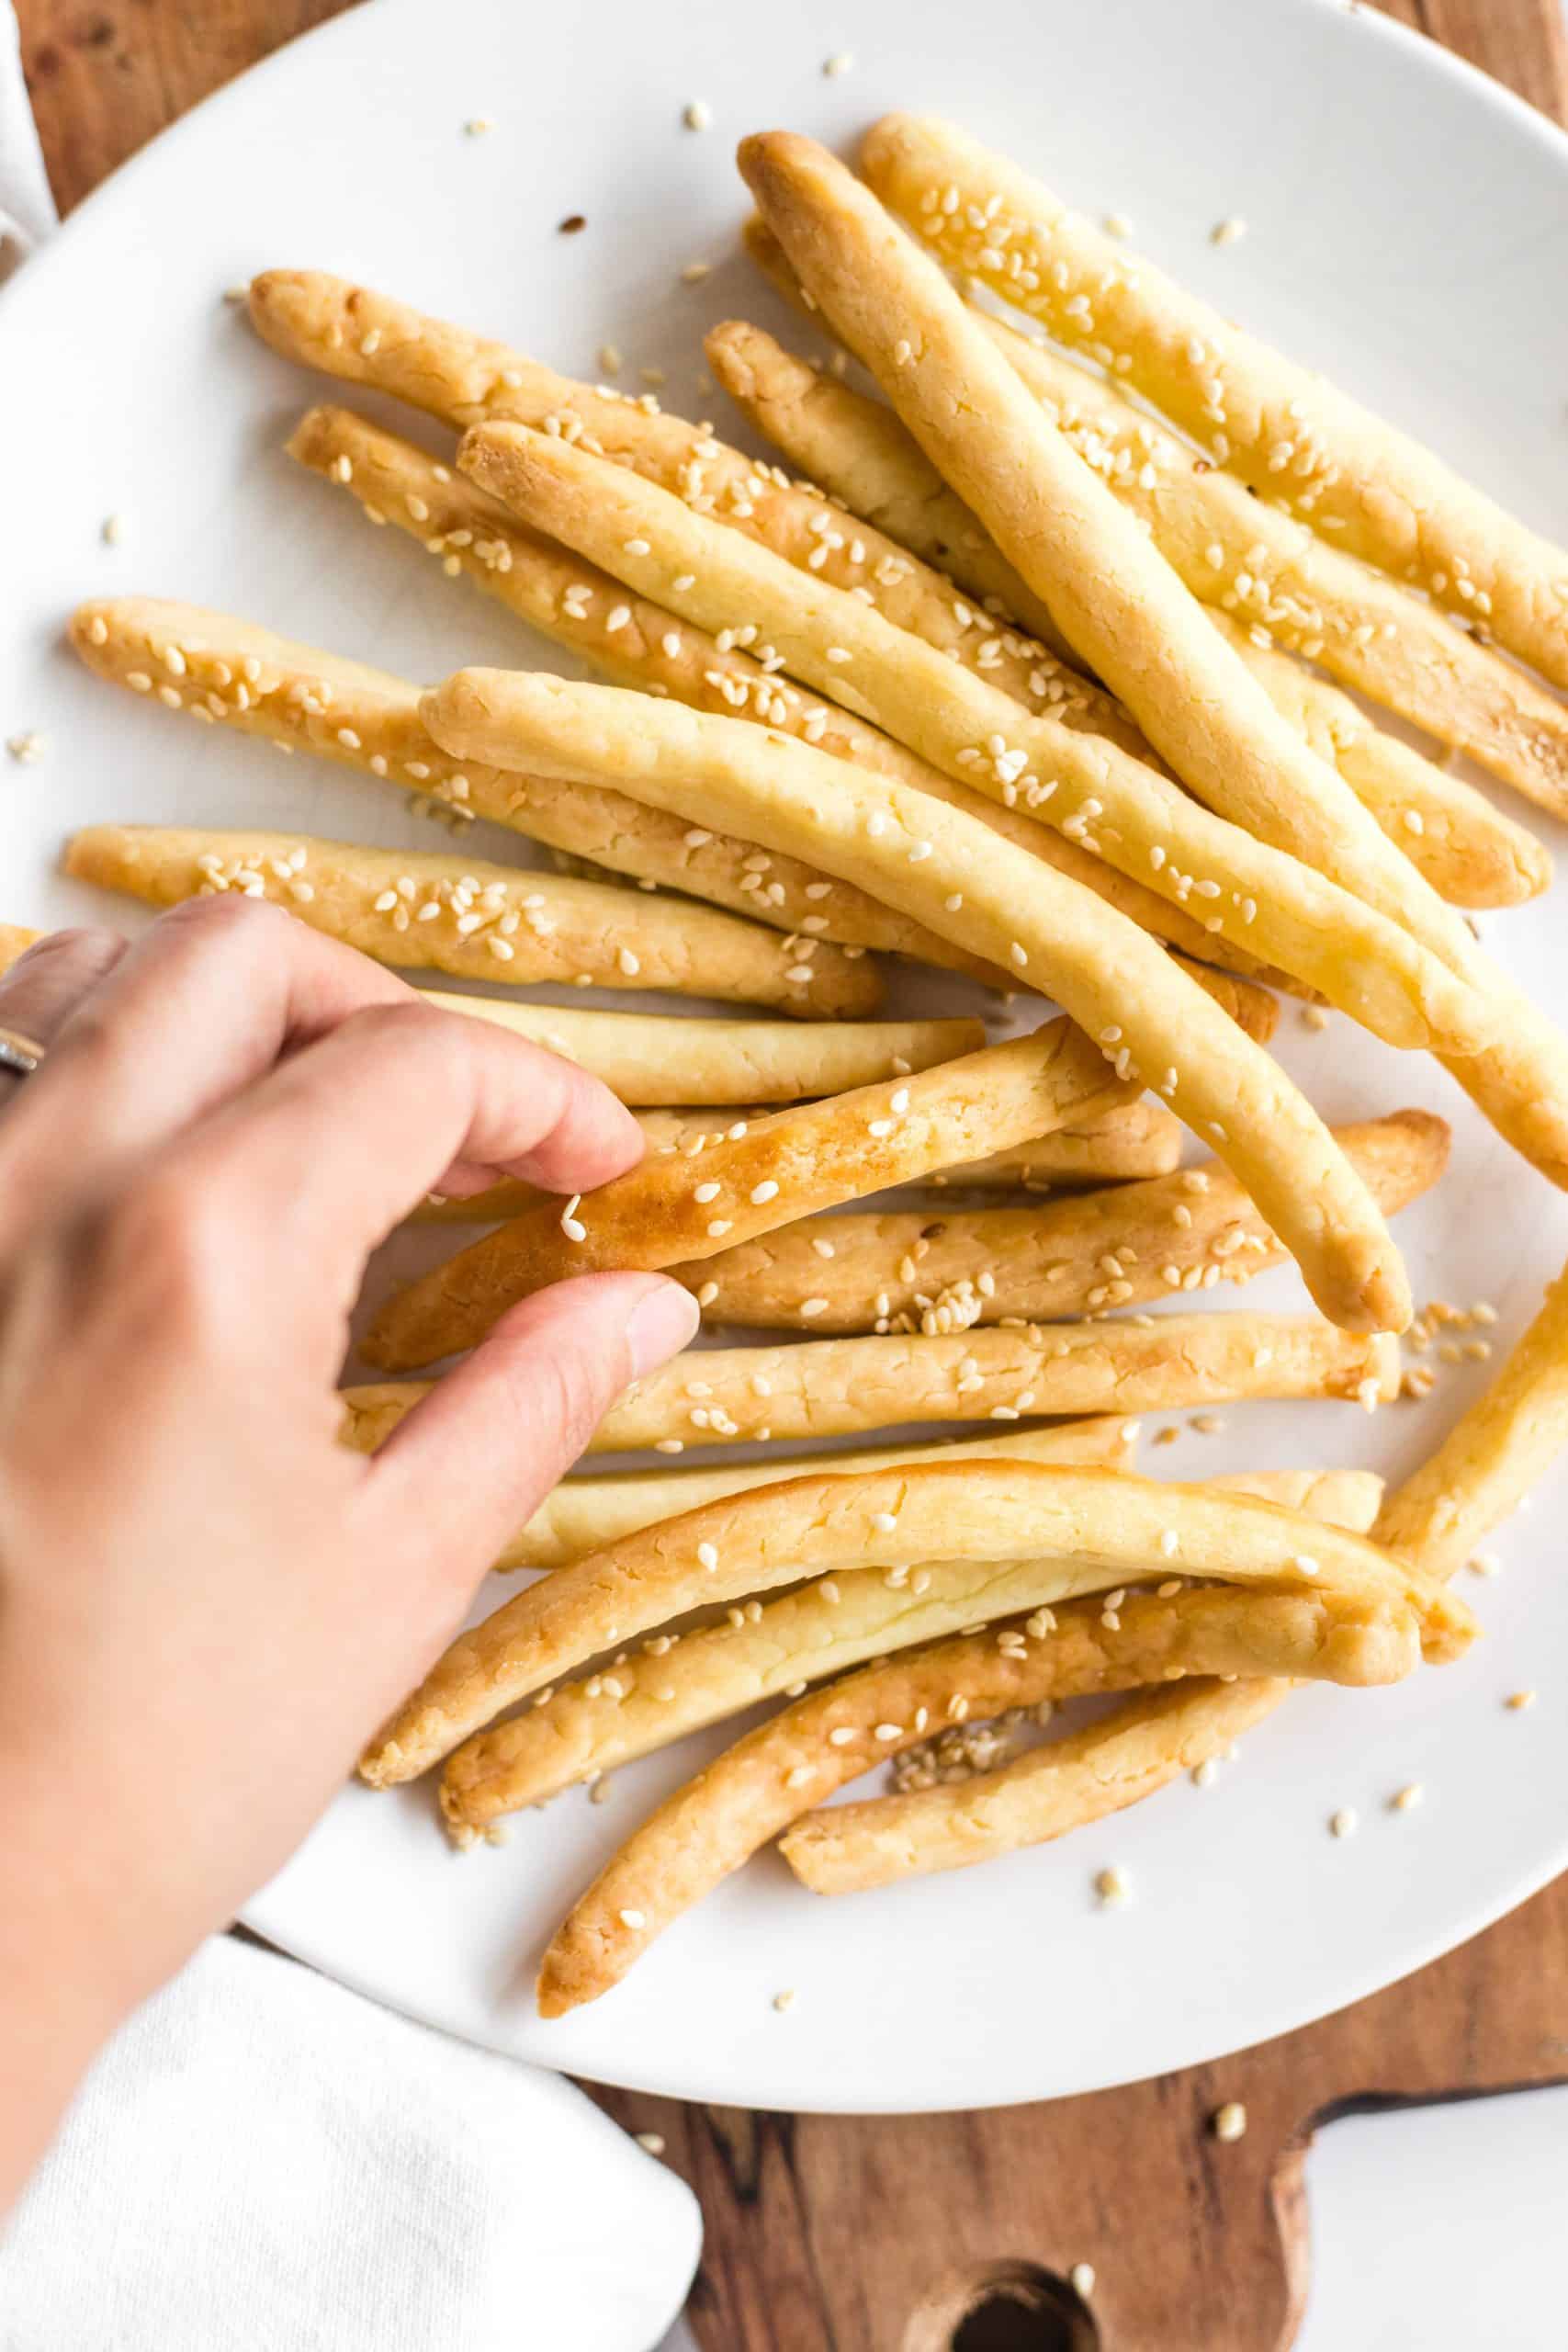 Hand reaching for a breadstick from a plate full of gluten-free grissini breadsticks.